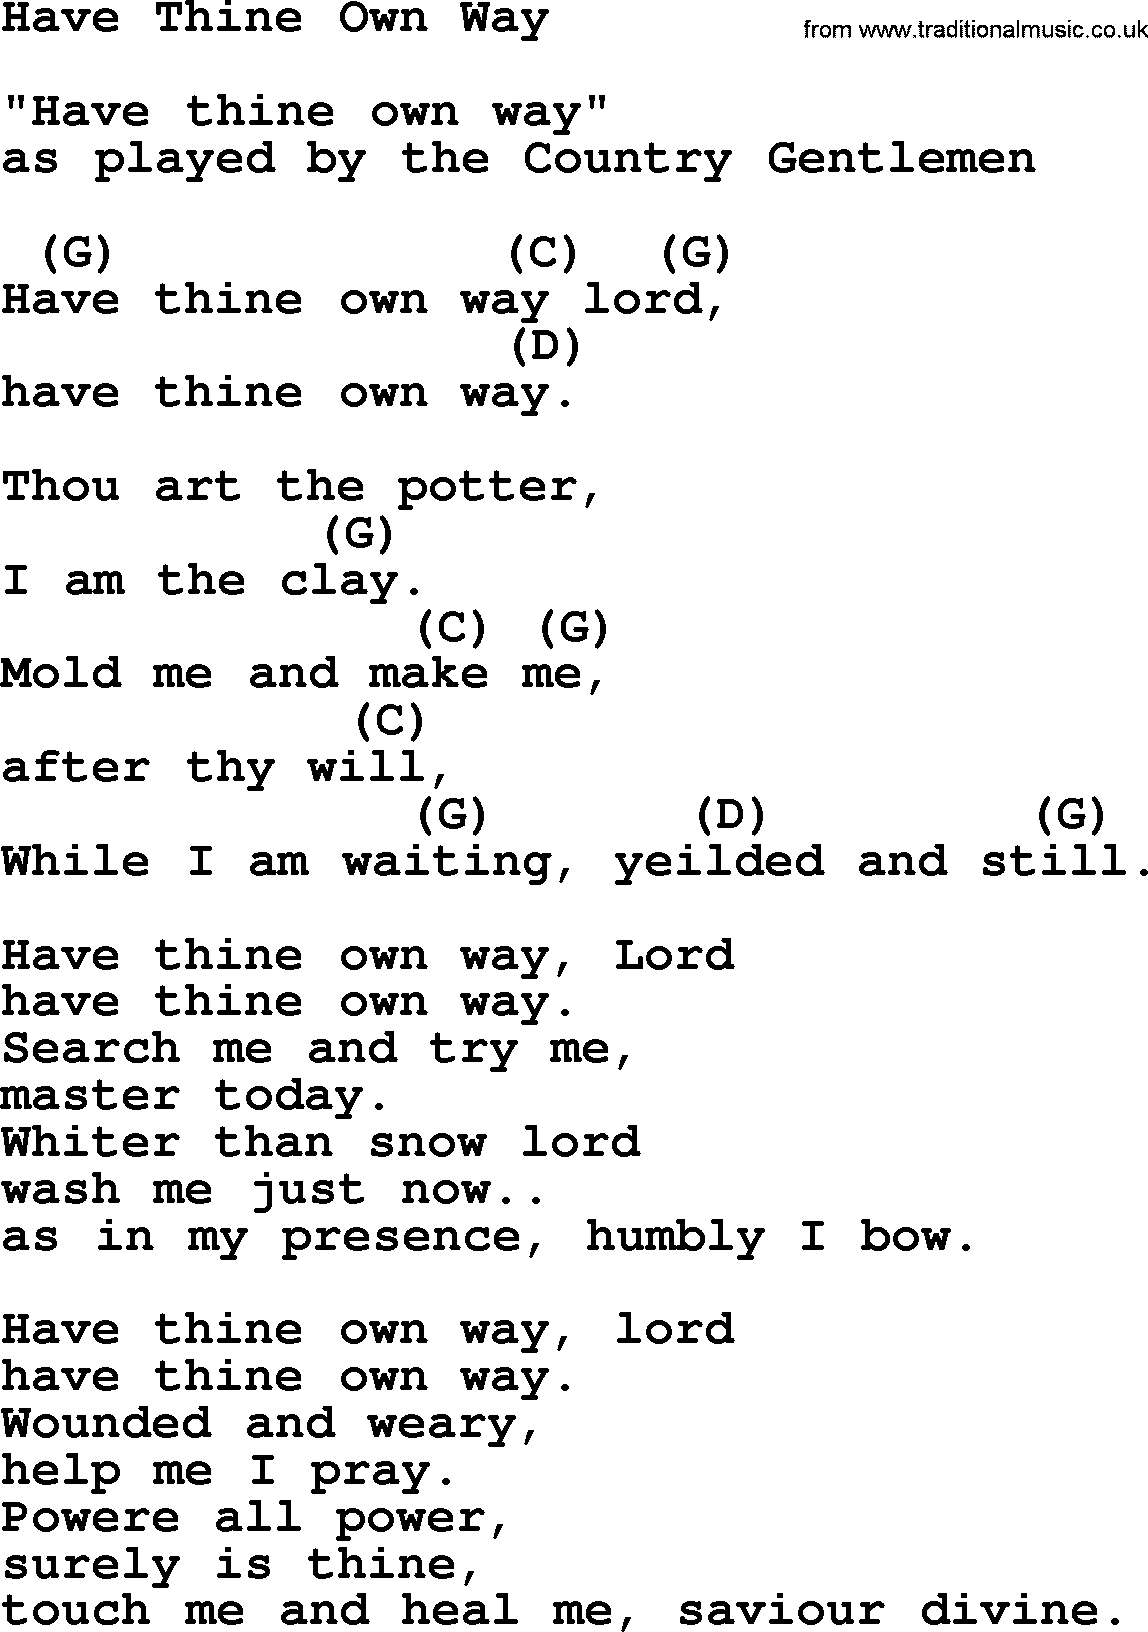 Bluegrass song: Have Thine Own Way, lyrics and chords